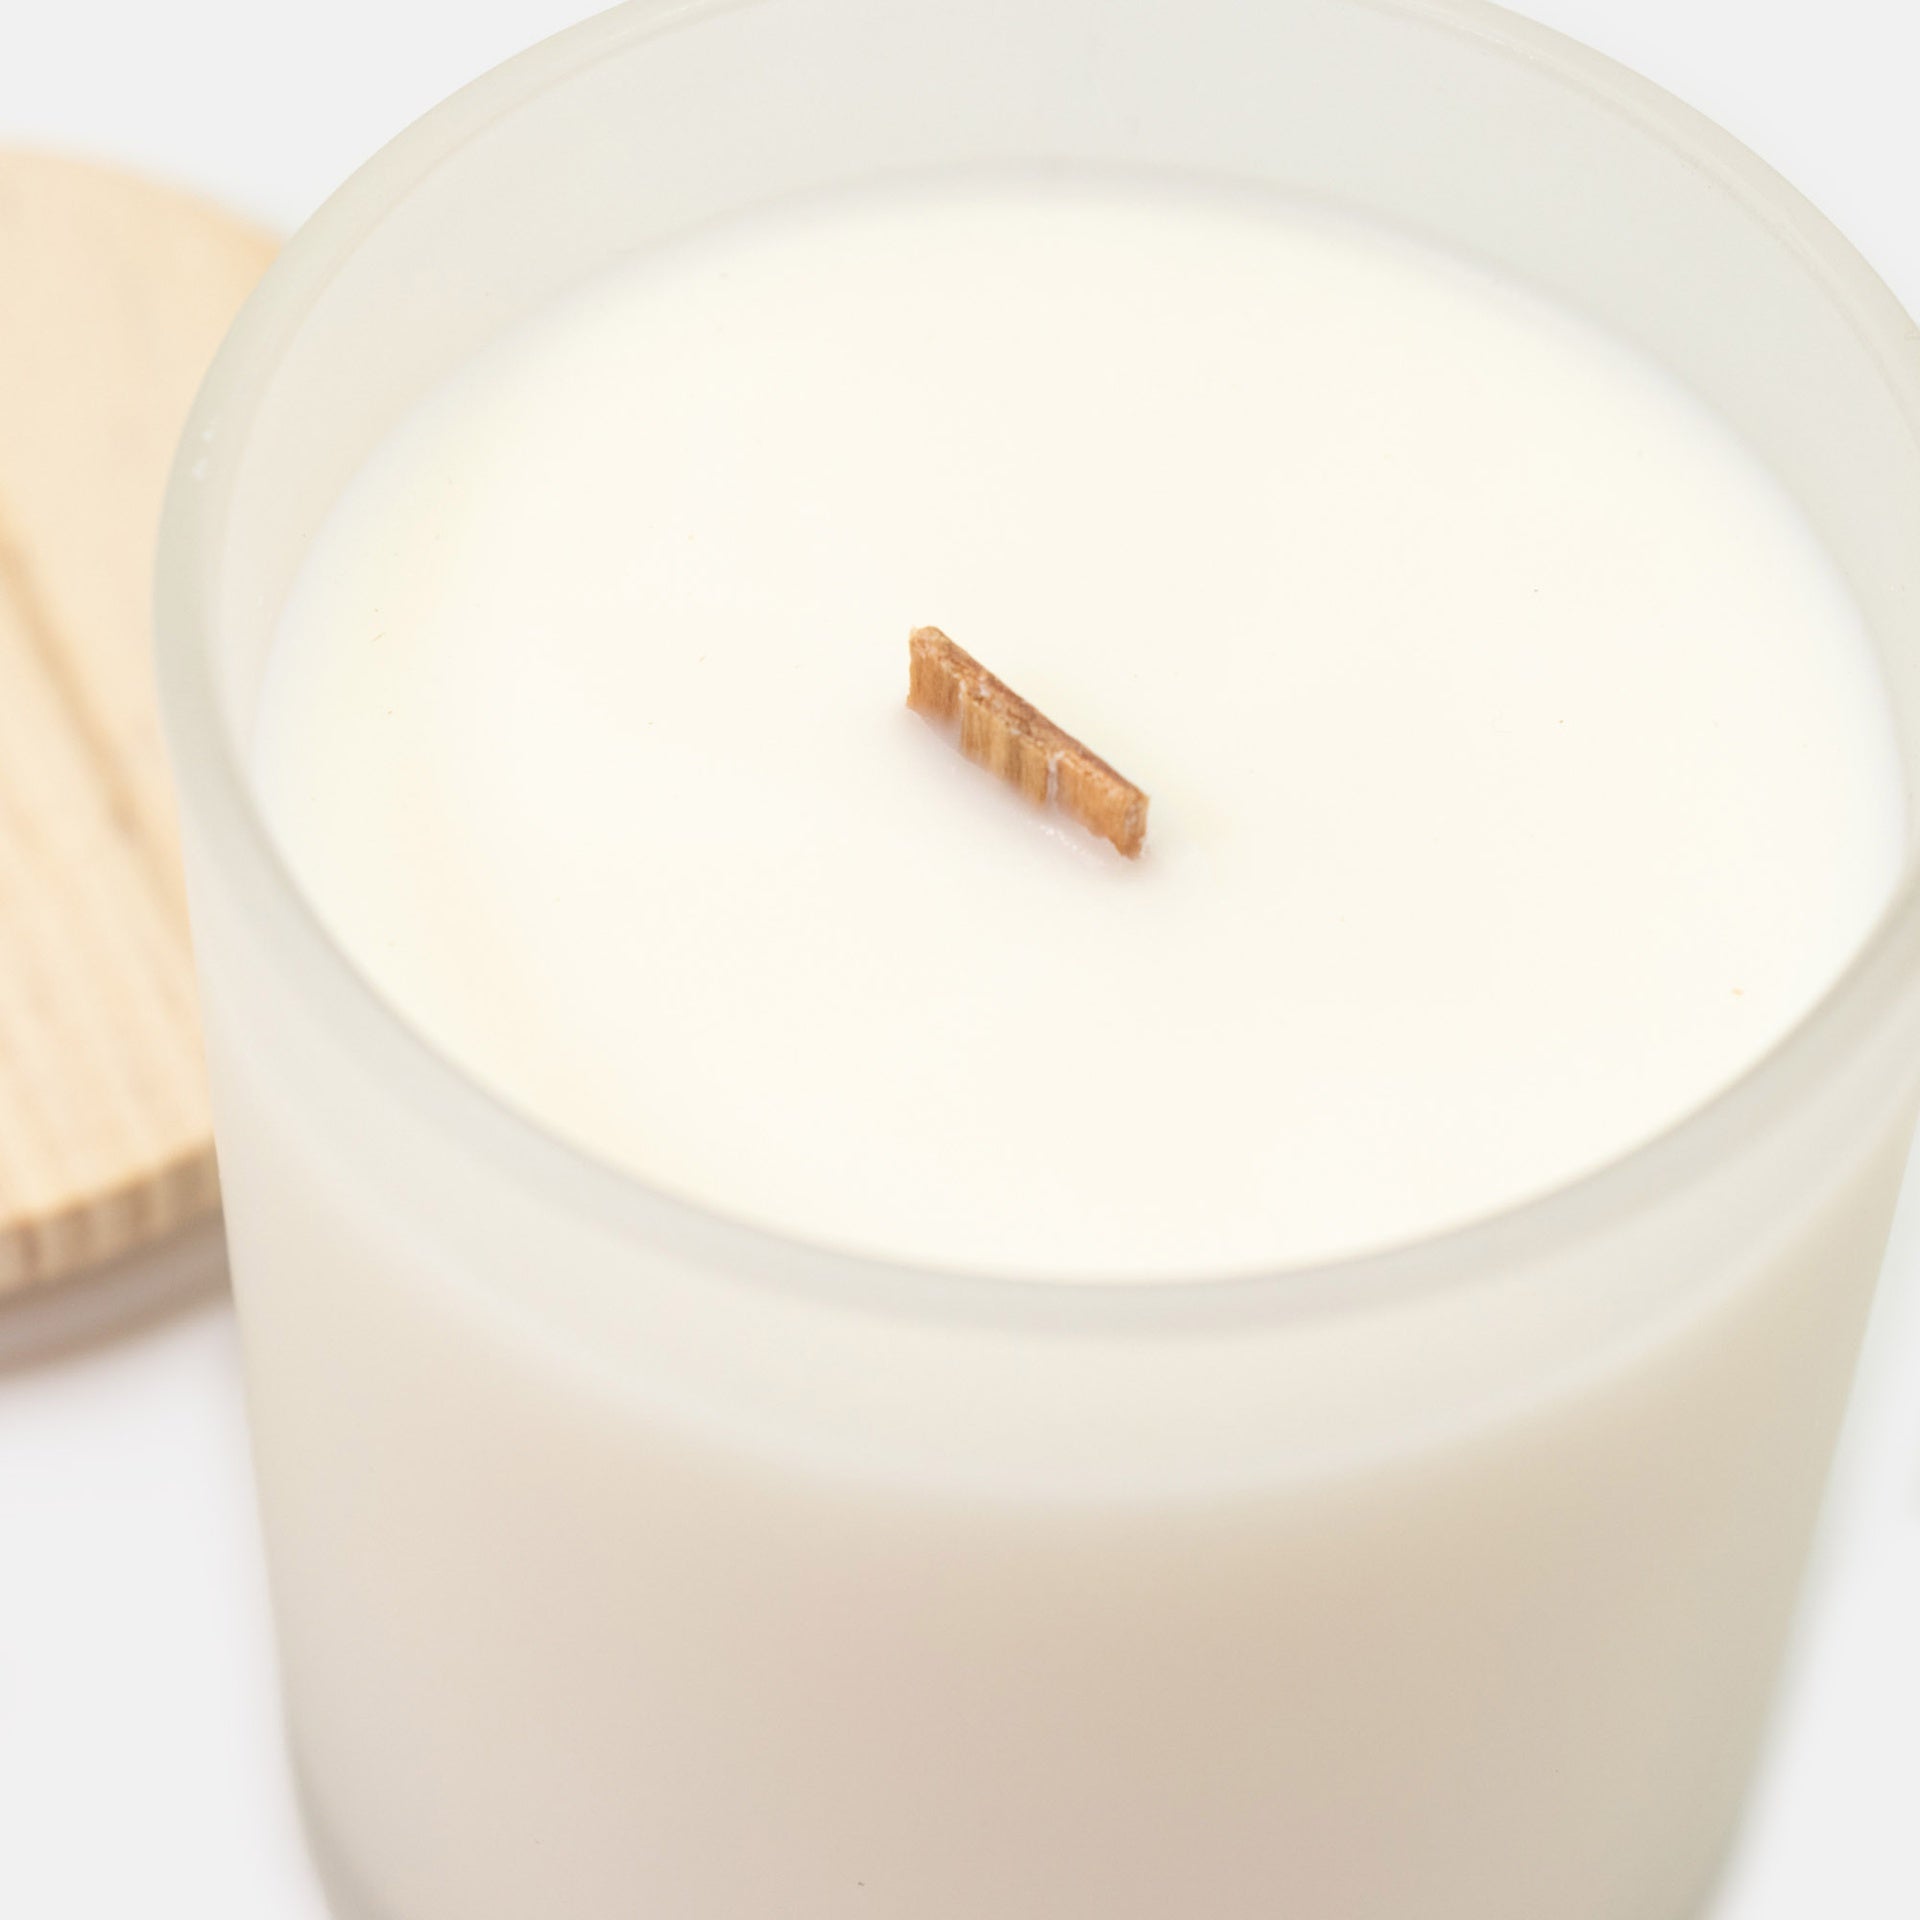 Glowstone Dust | 11oz Candle | Minecraft Candles Threads & Thistles Inventory 